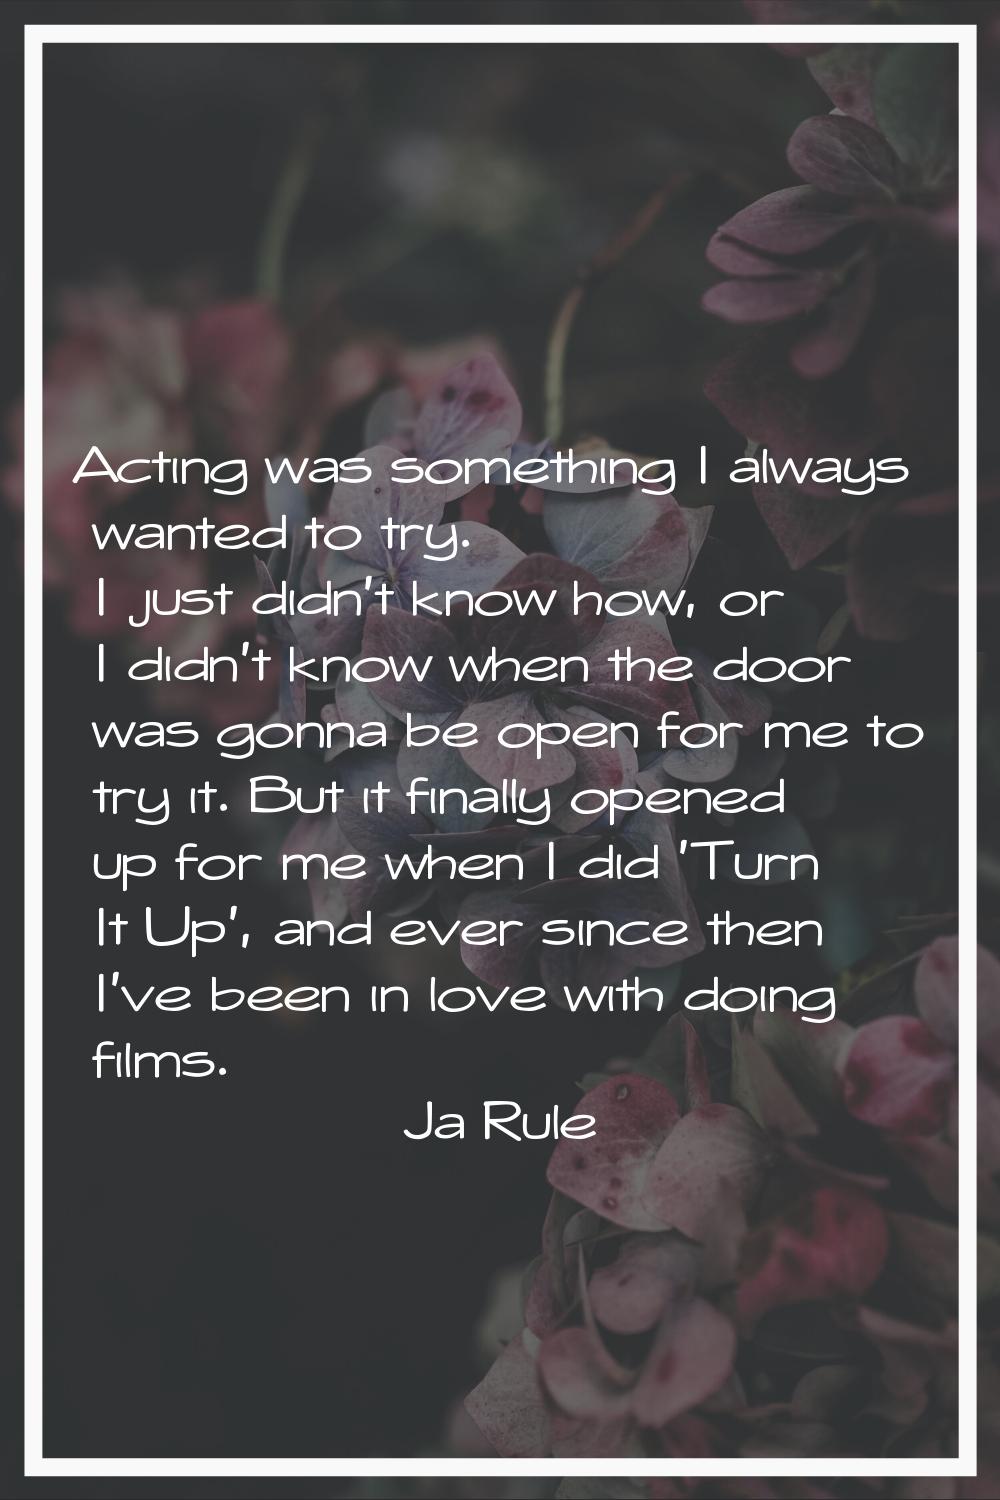 Acting was something I always wanted to try. I just didn't know how, or I didn't know when the door